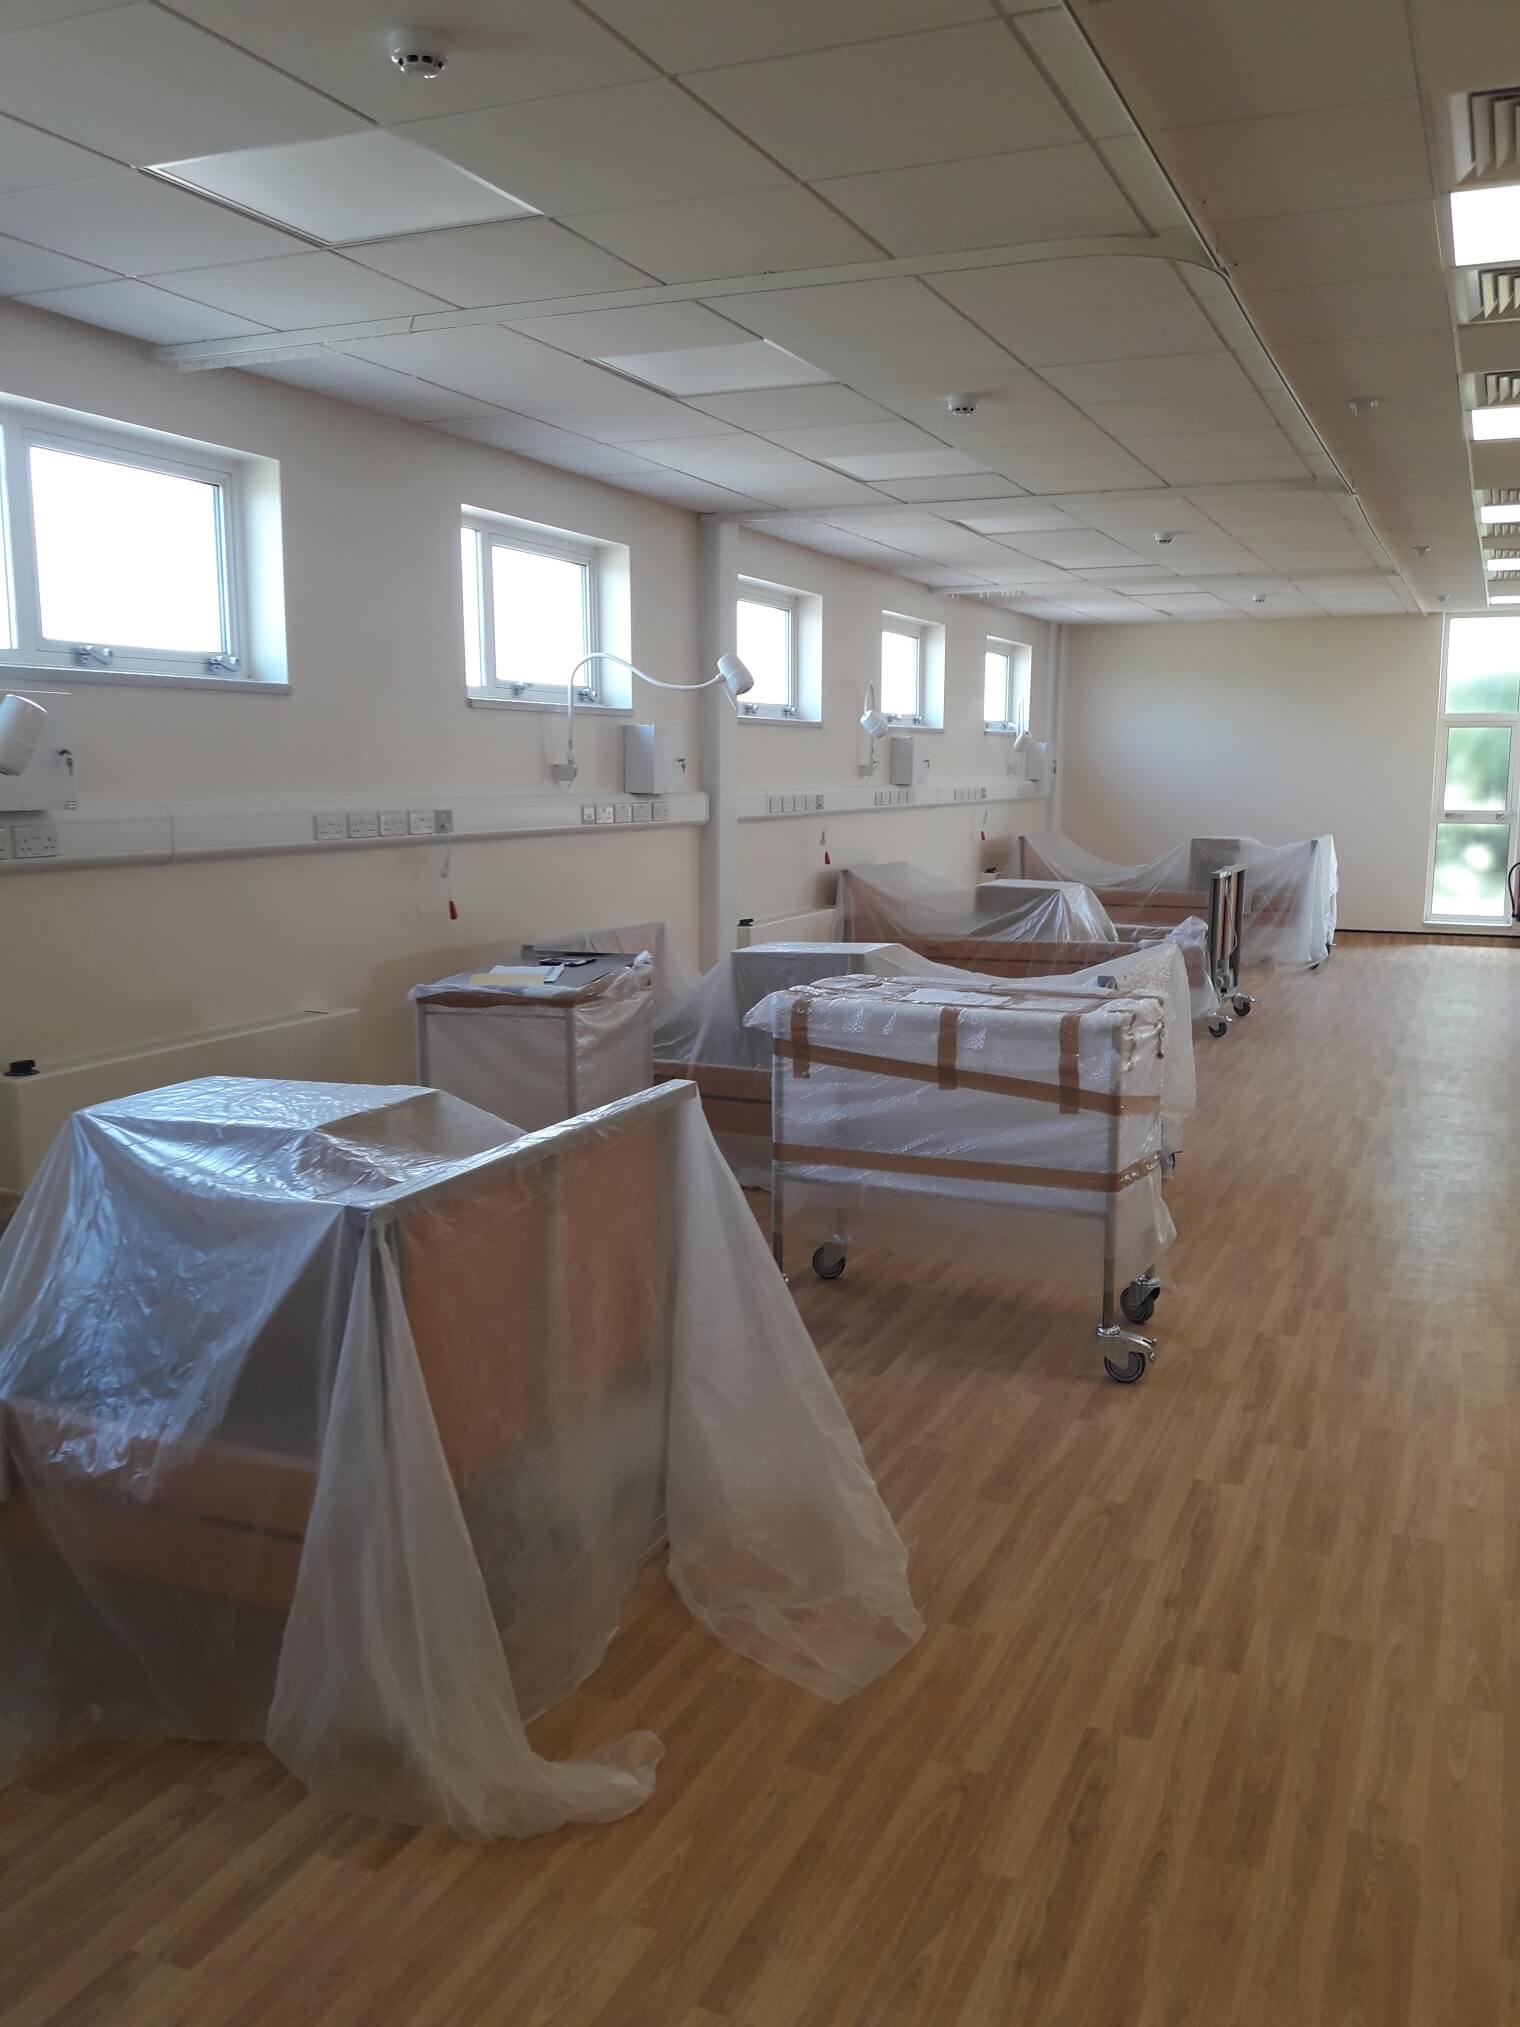 Creating additional bed capacity and testing facilities to support a Trust’s COVID-19 response